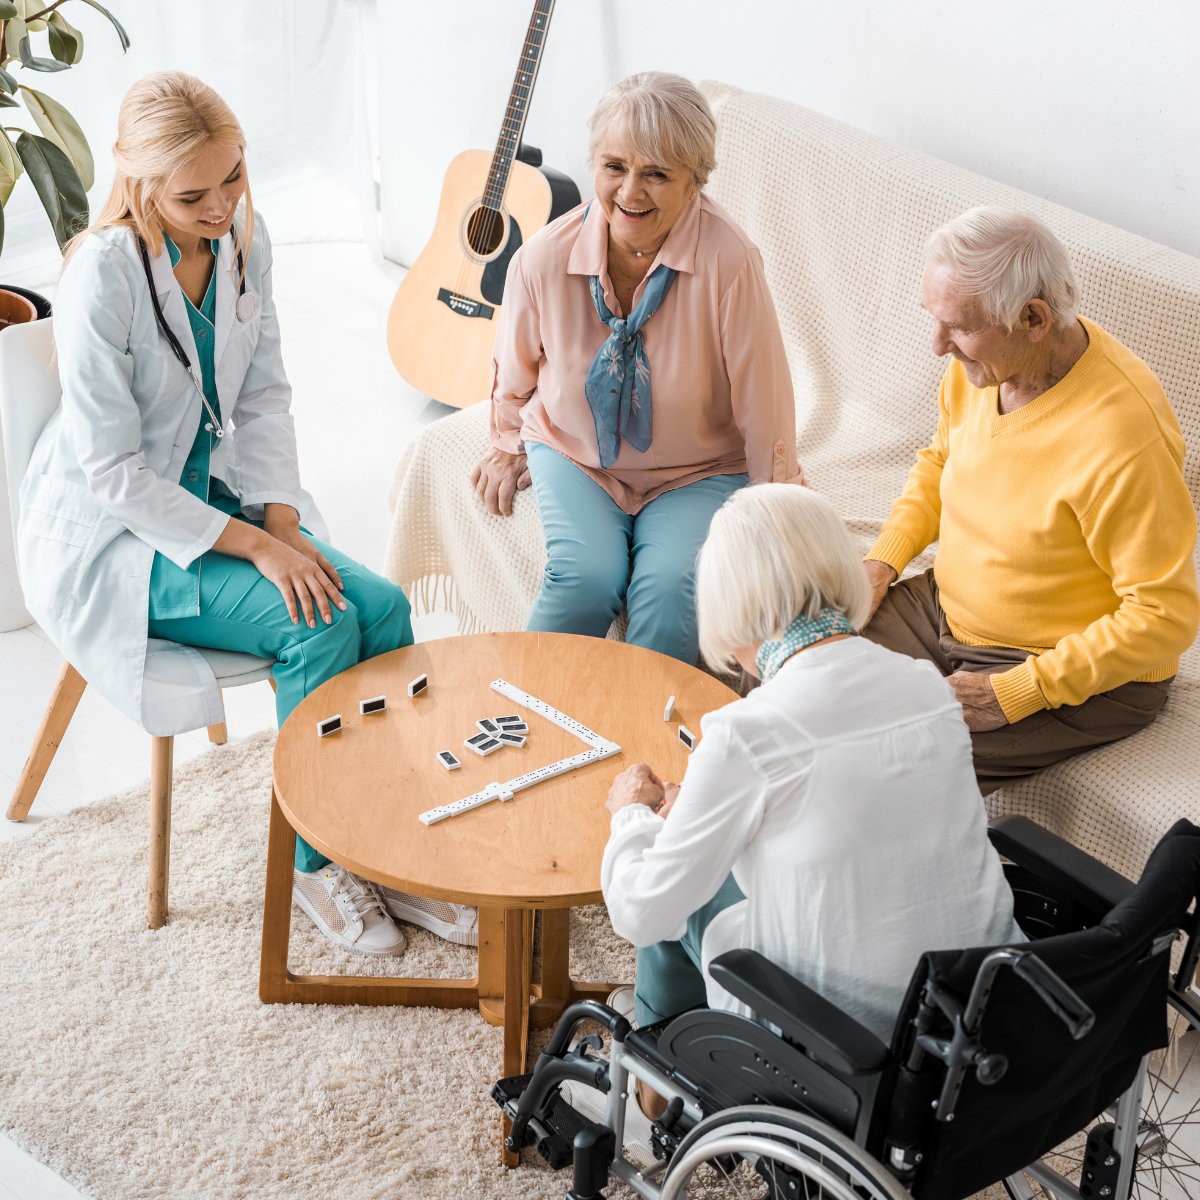 Playing games at a nursing home vs at home health care